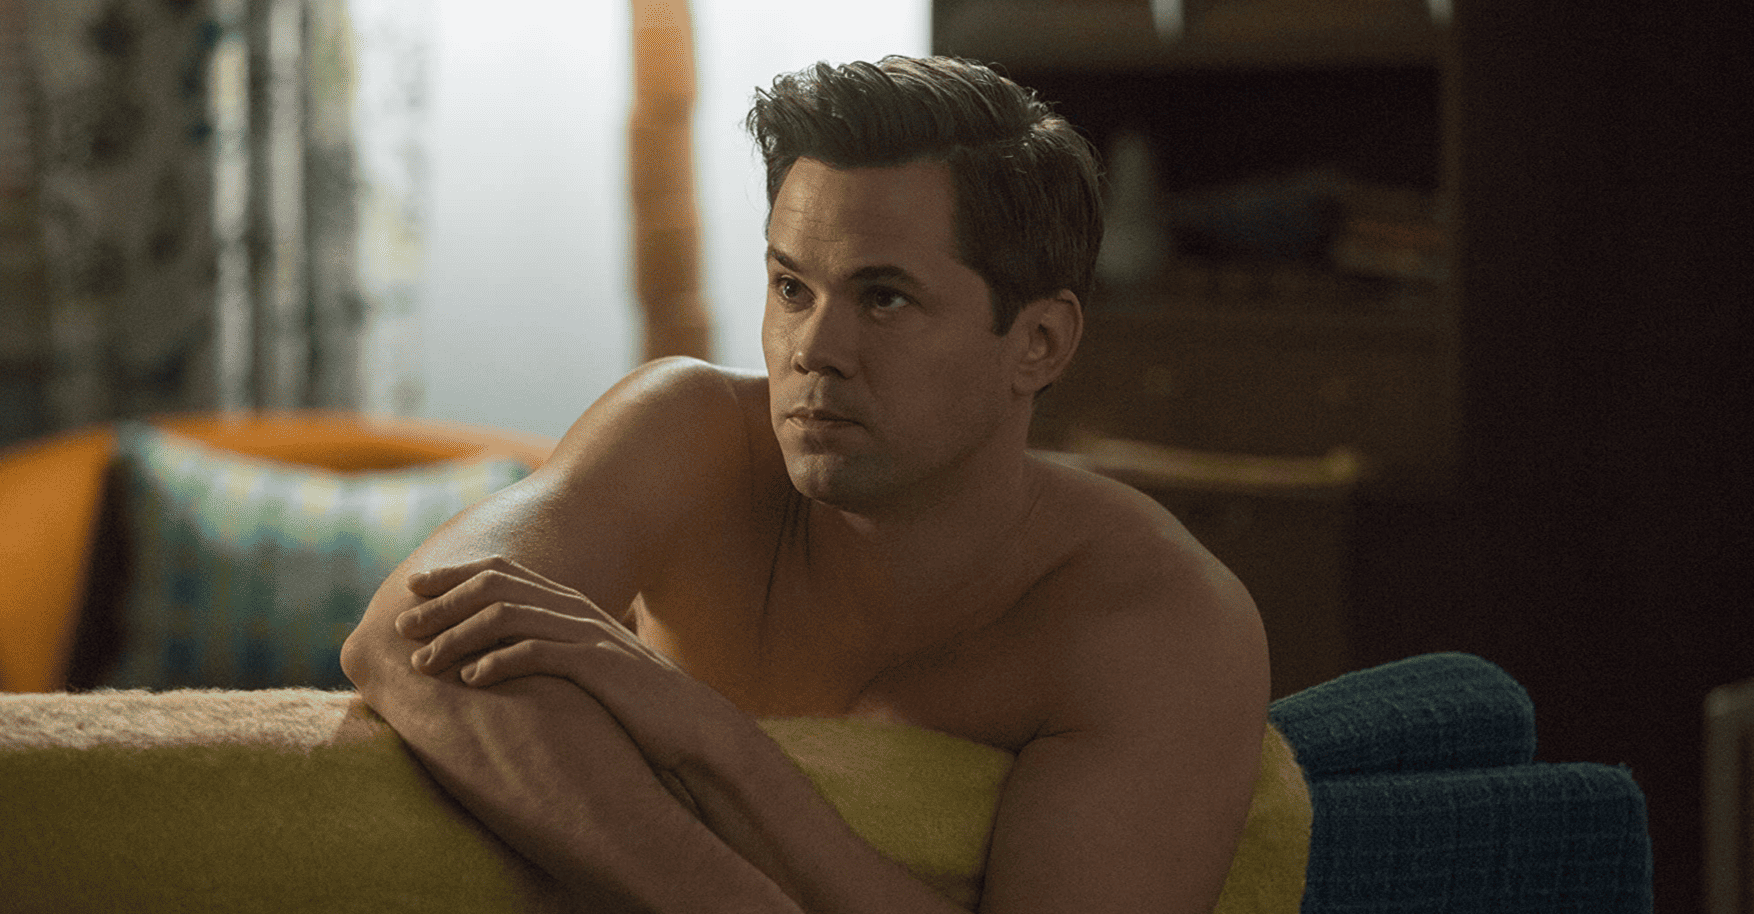 A shirtless Elijah sits dreamily on the couch in this image from Apatow Productions